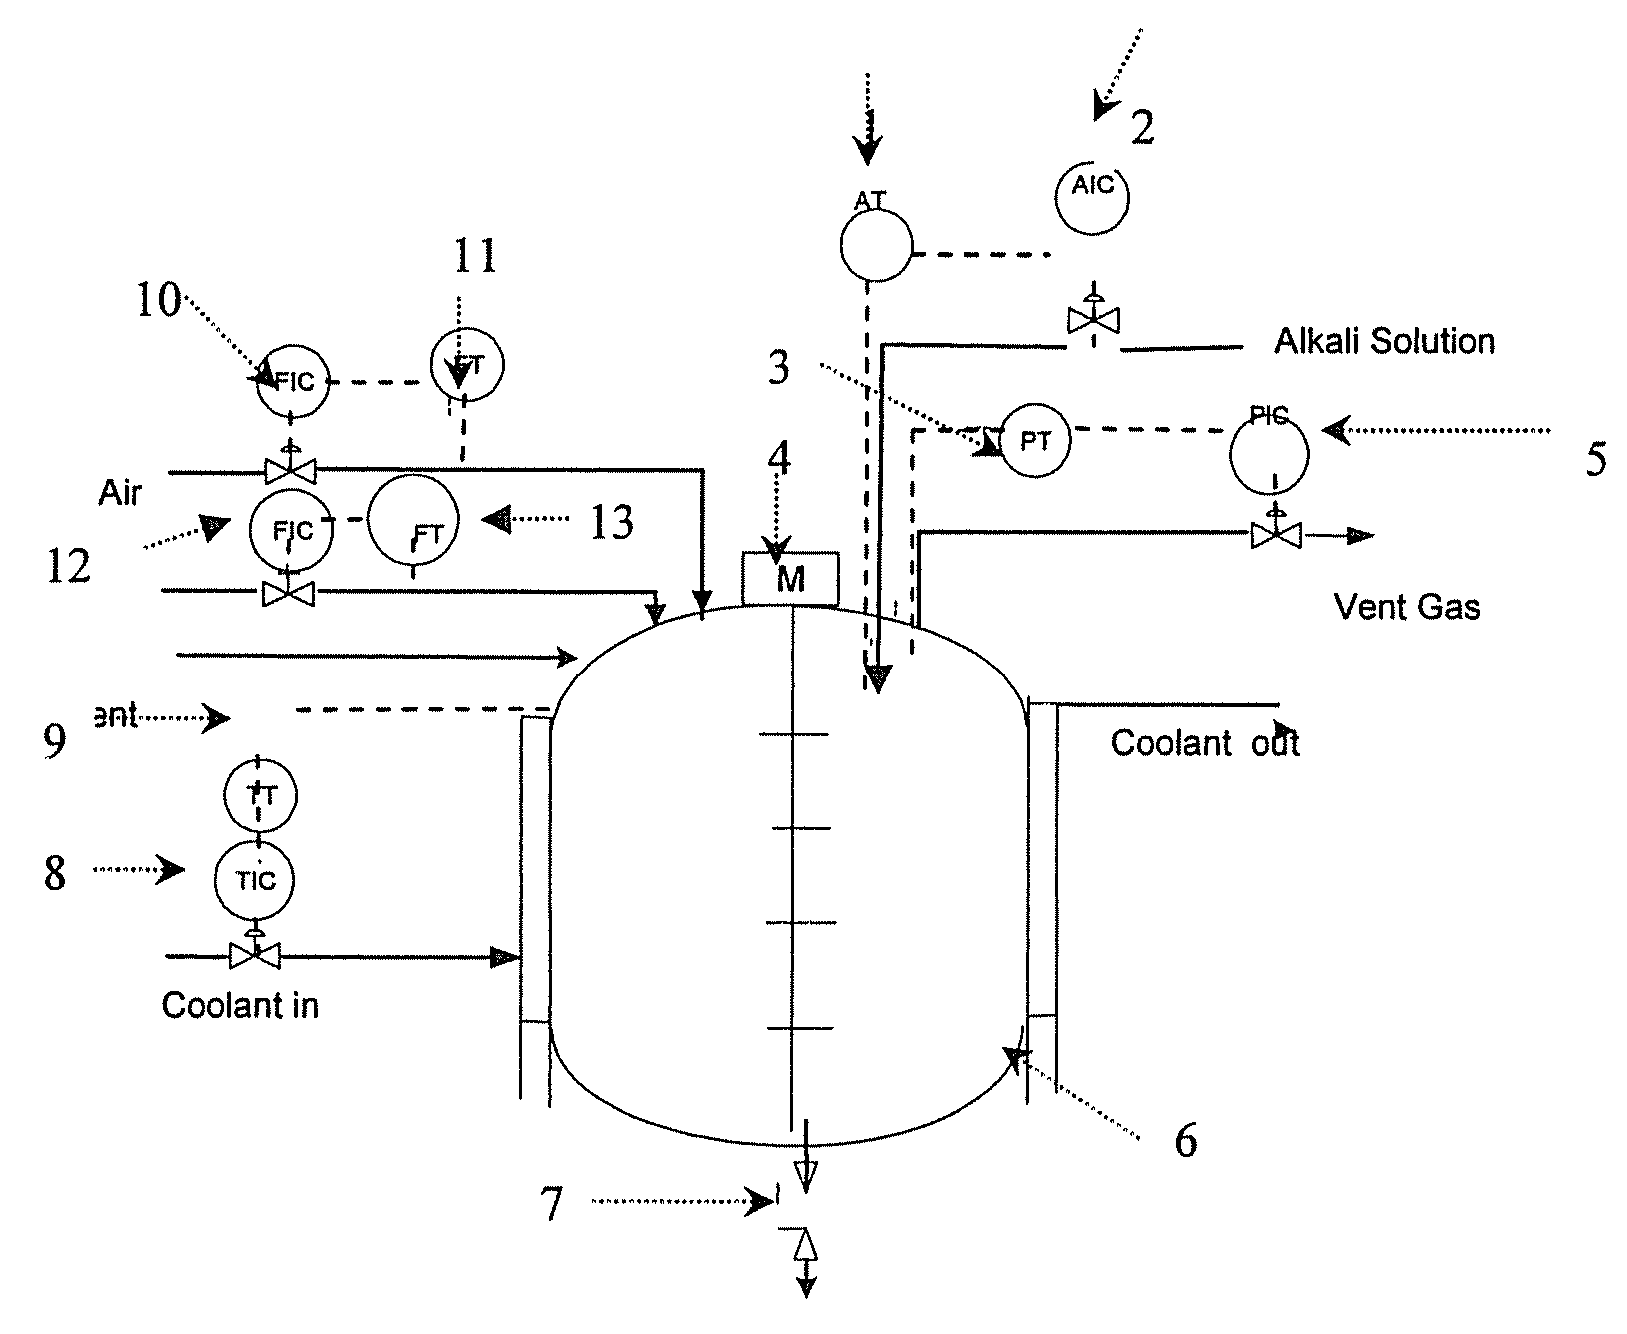 Method for on-line optimization of a fed-batch fermentation unit to maximize the product yield